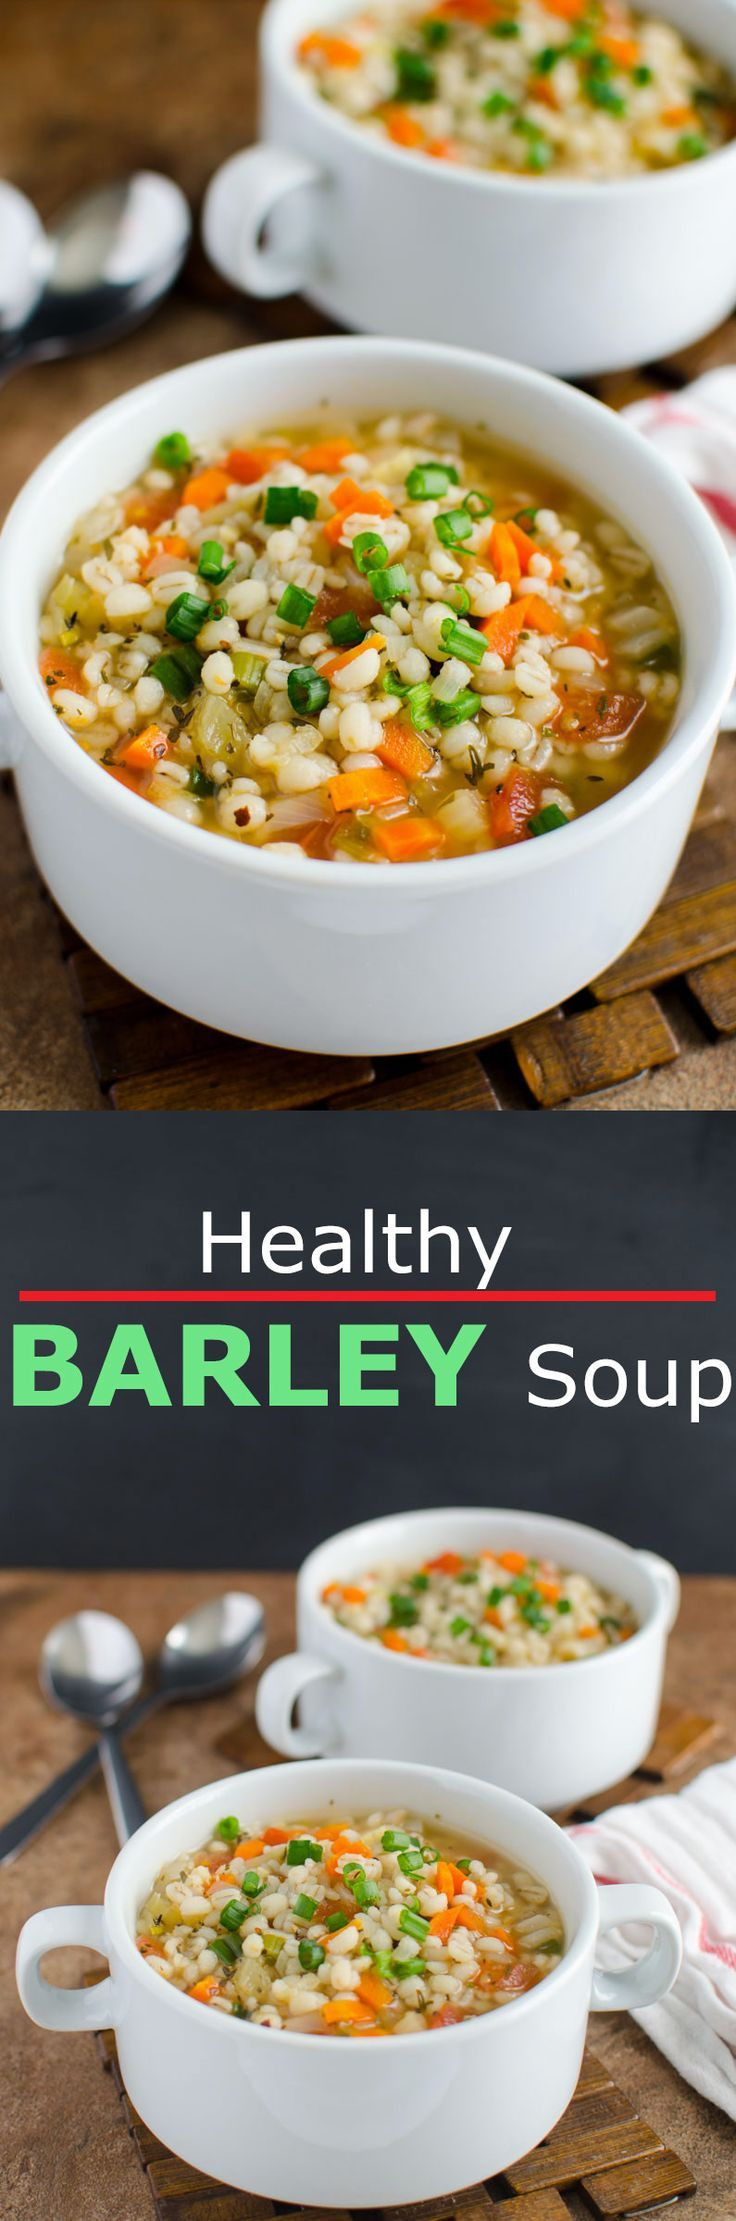 Healthy Barley Recipes
 Homemade healthy barley soup recipe Perfect option to add